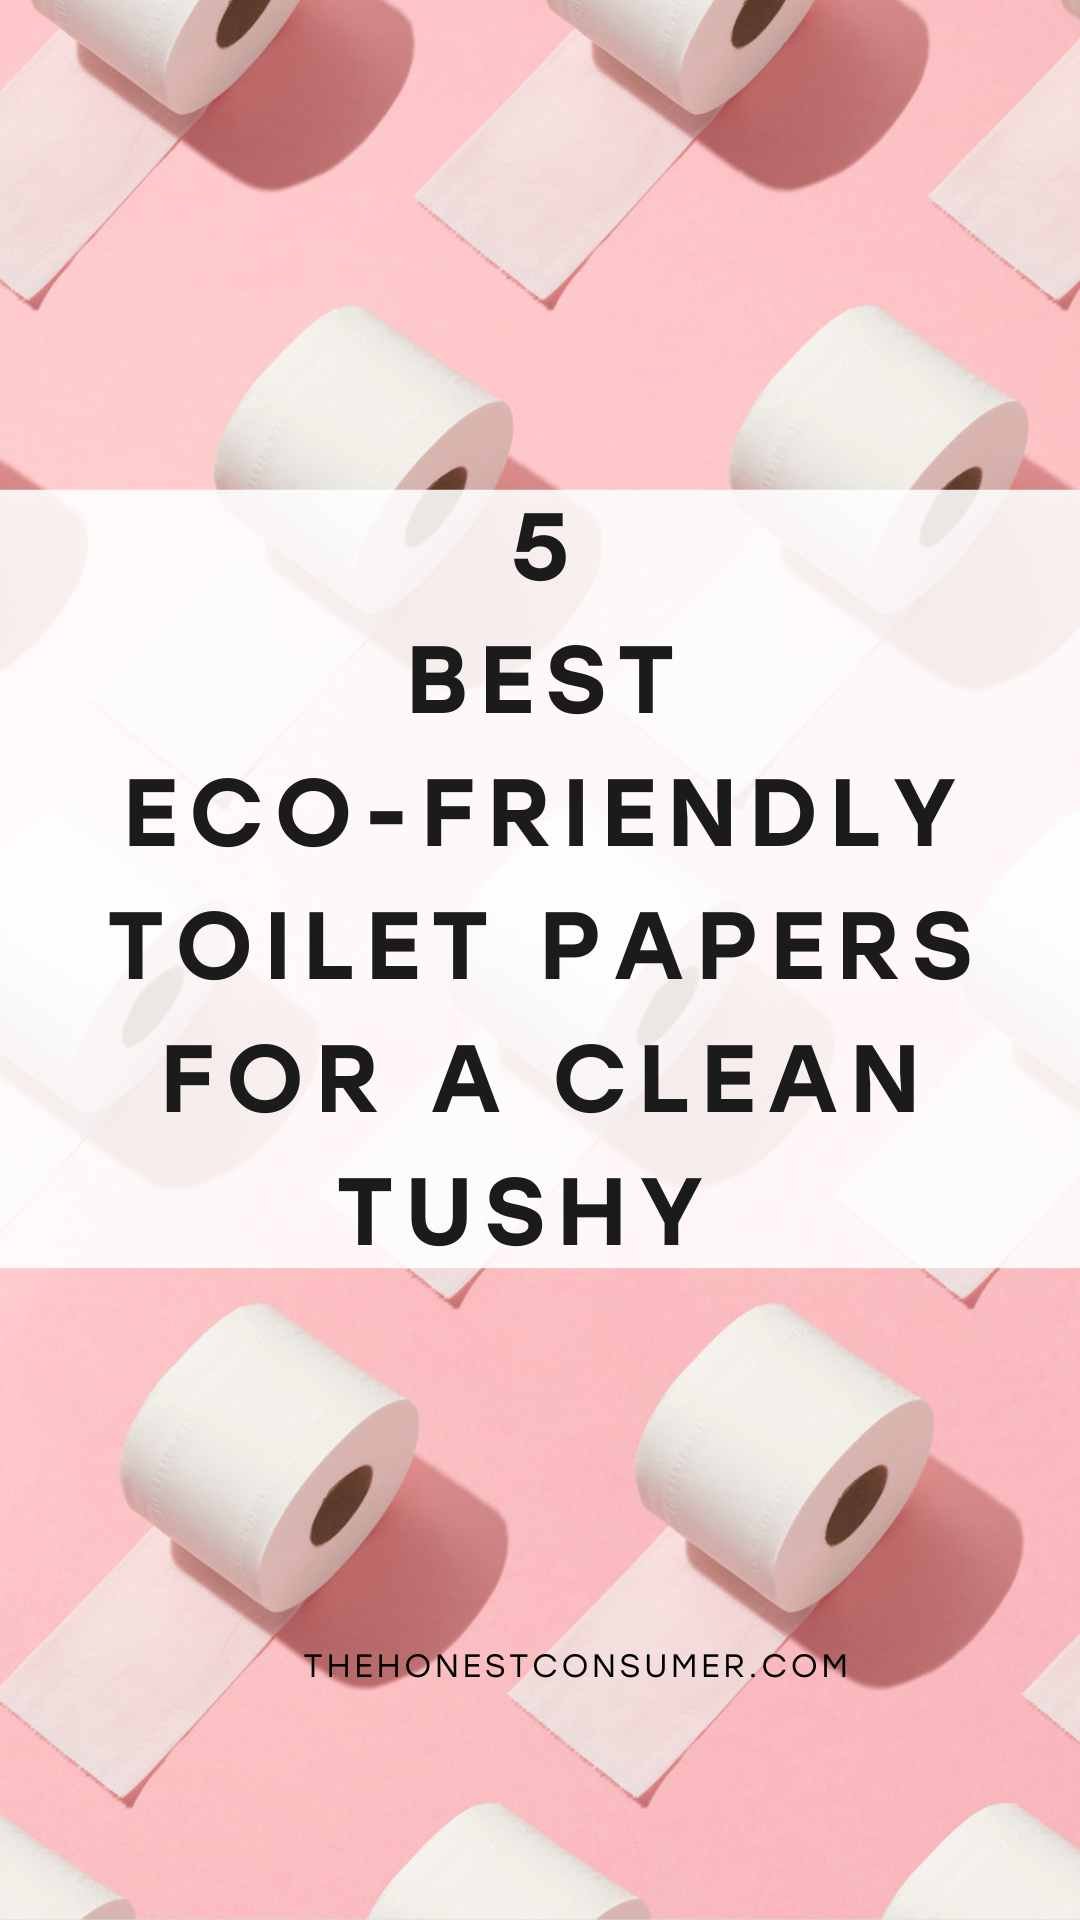 What Are the Best Alternatives to Toilet Paper?